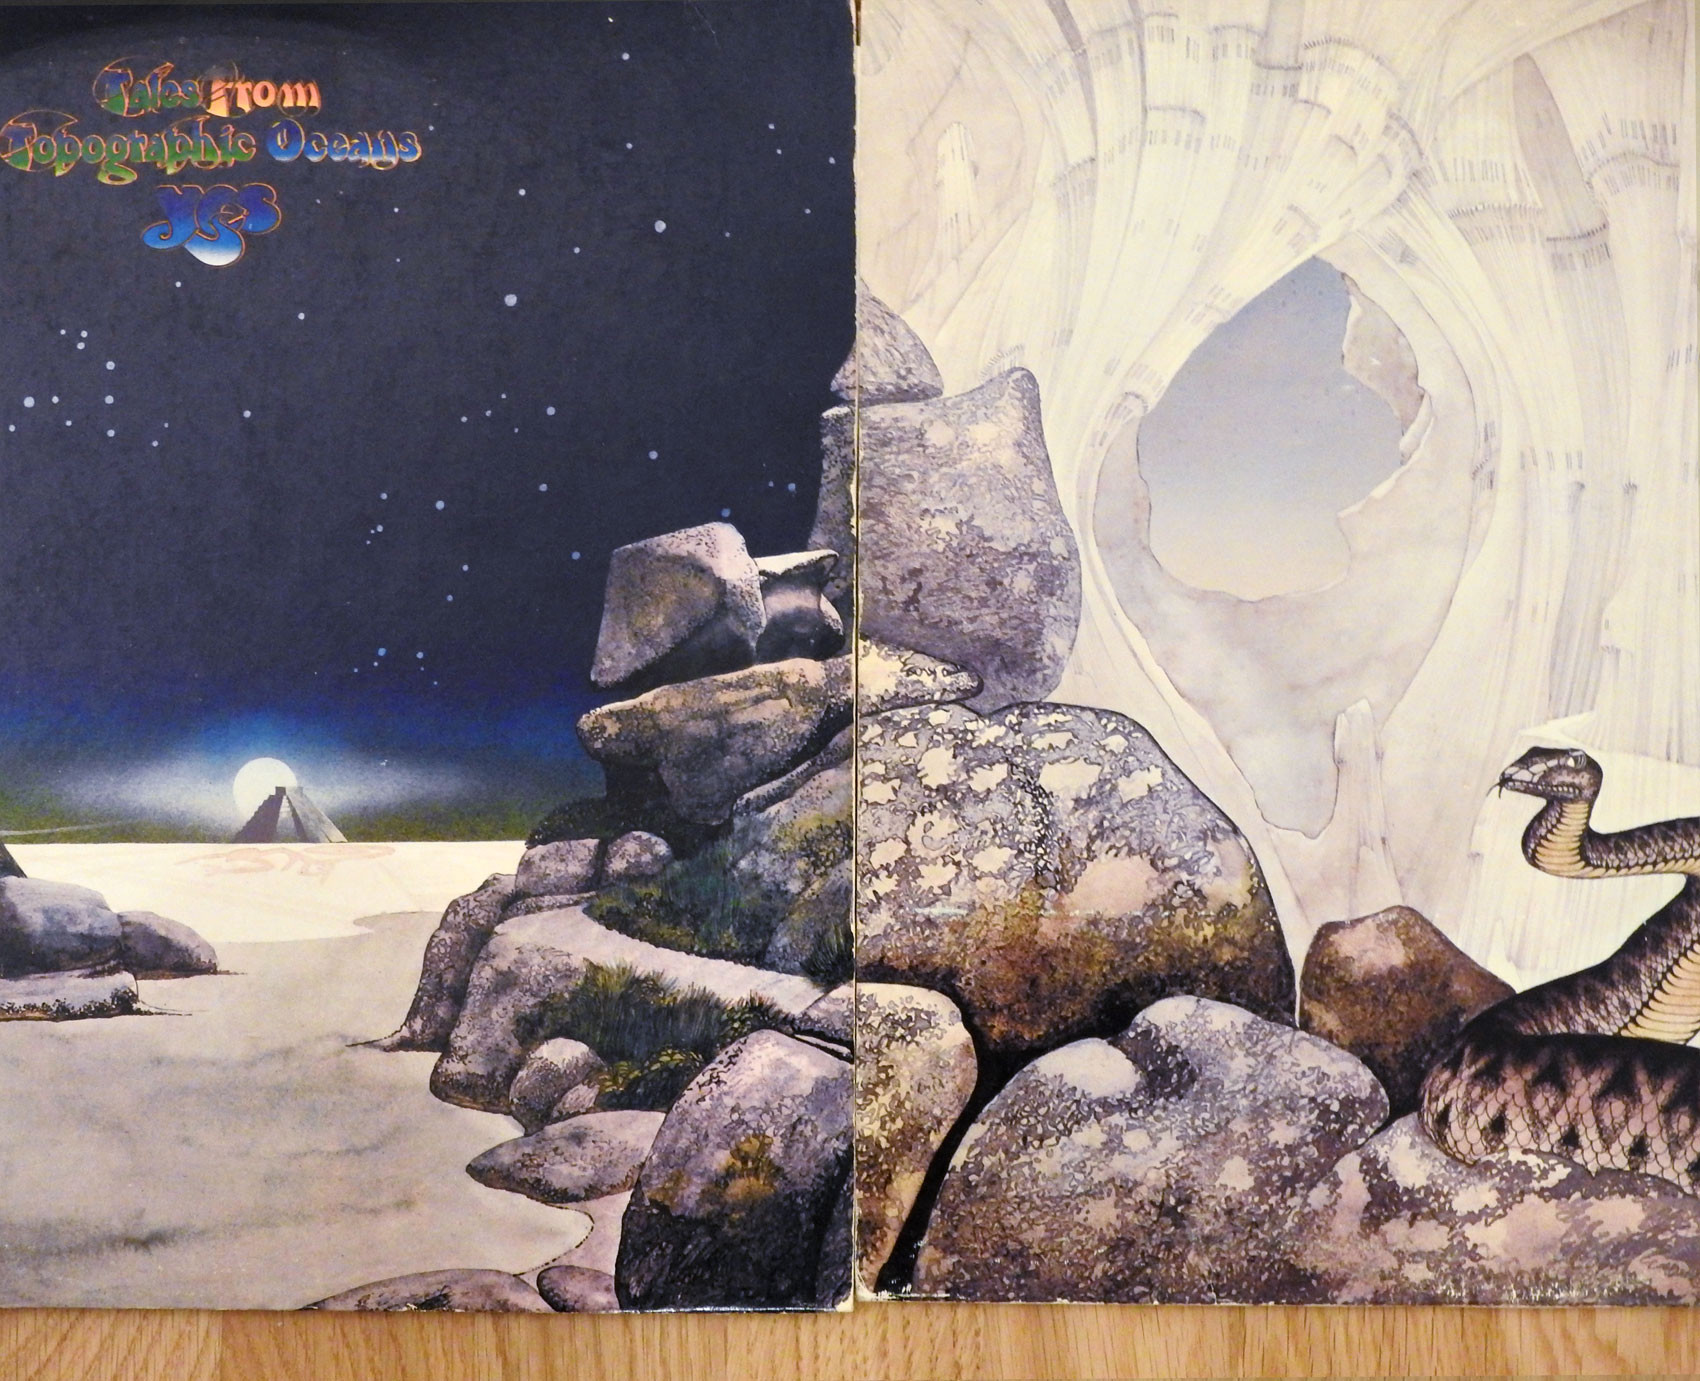 Topographic Oceans and Relayer by Yes